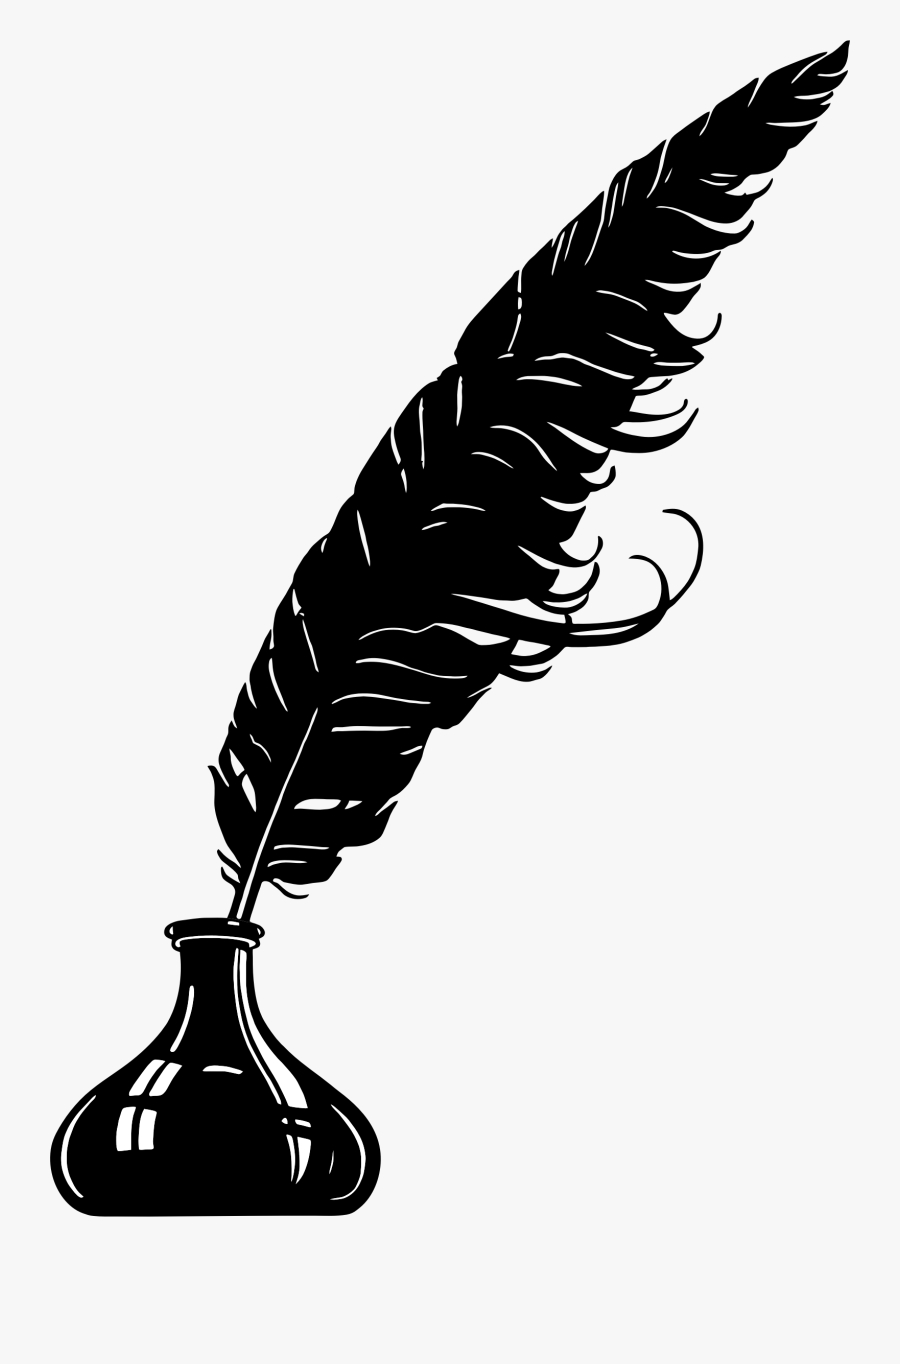 Quill Inkwell Pen Paper - Quill Pen, Transparent Clipart